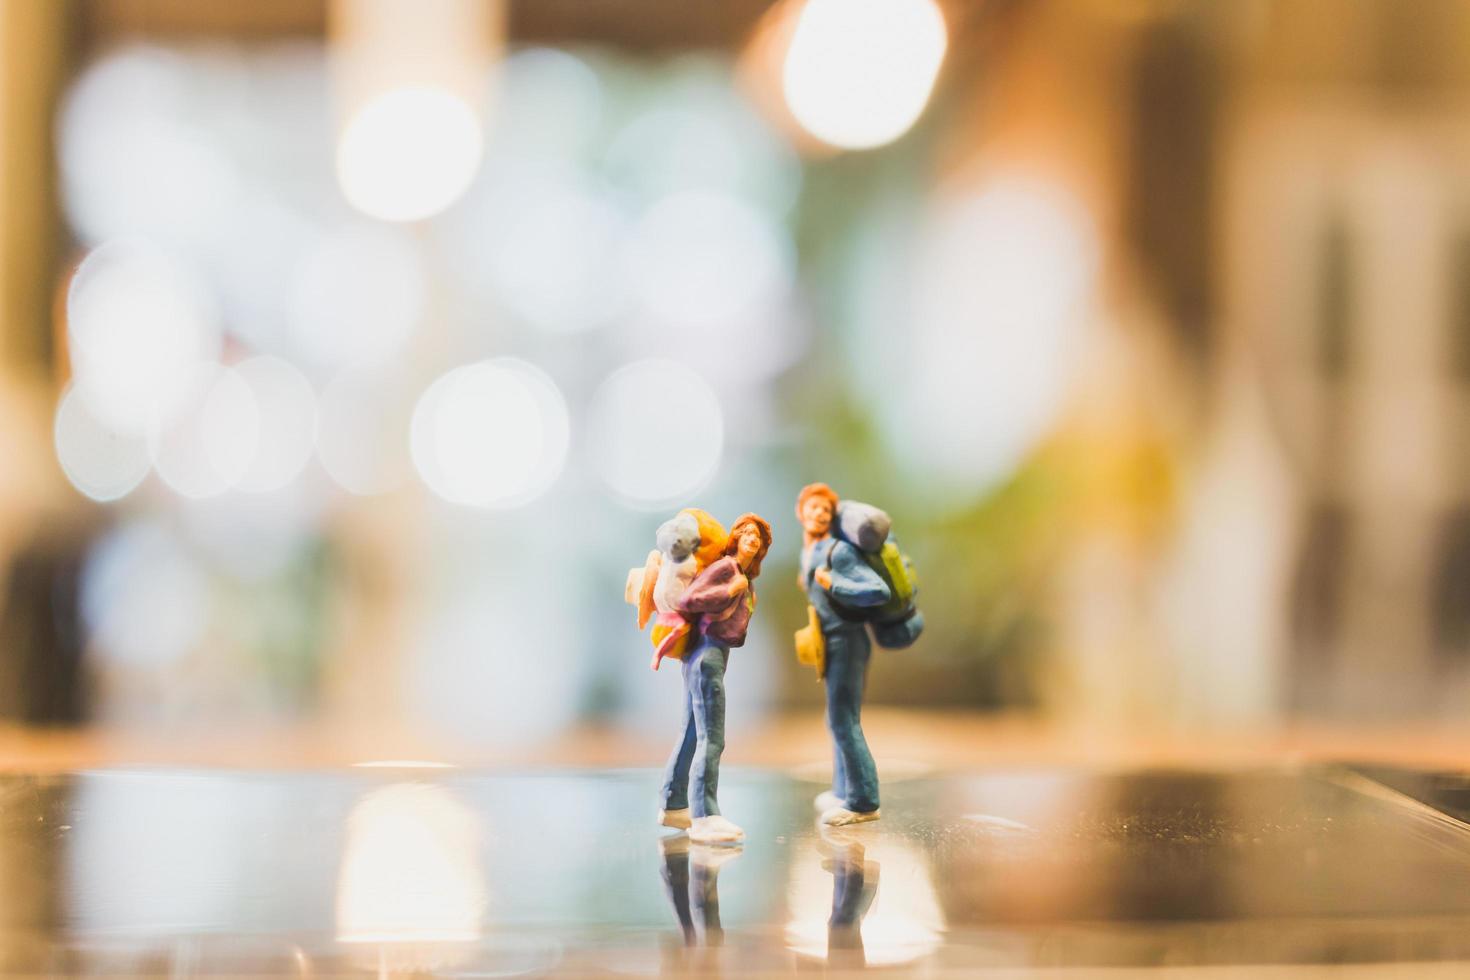 Miniature backpacker tourist people standing on glass with a blurred background photo